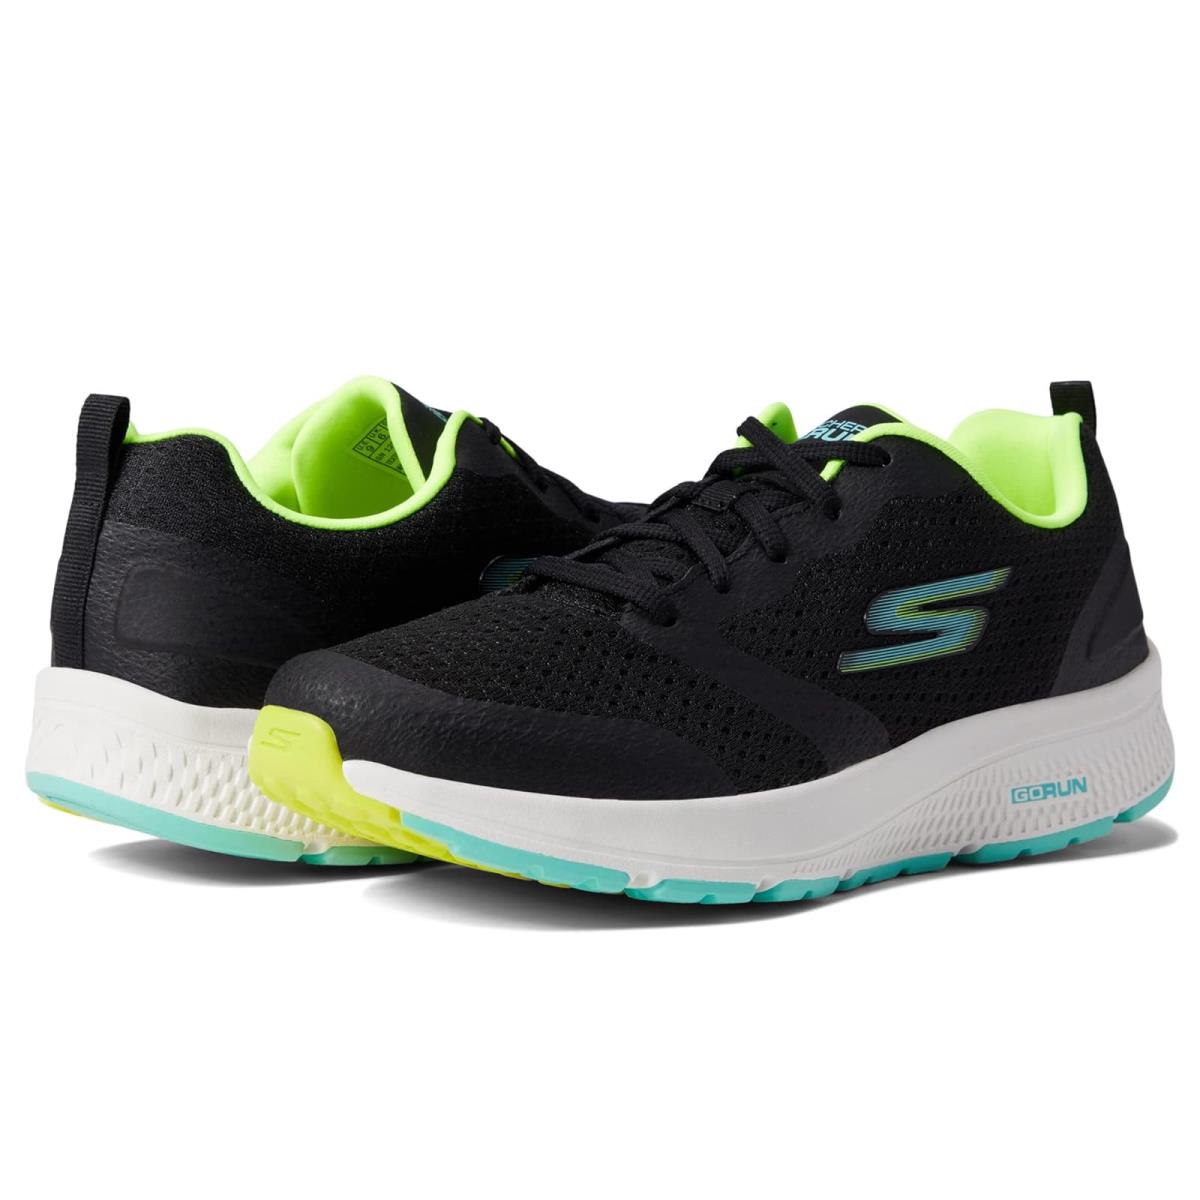 Woman`s Sneakers Athletic Shoes Skechers Go Run Consistent - Intensify Black/Lime